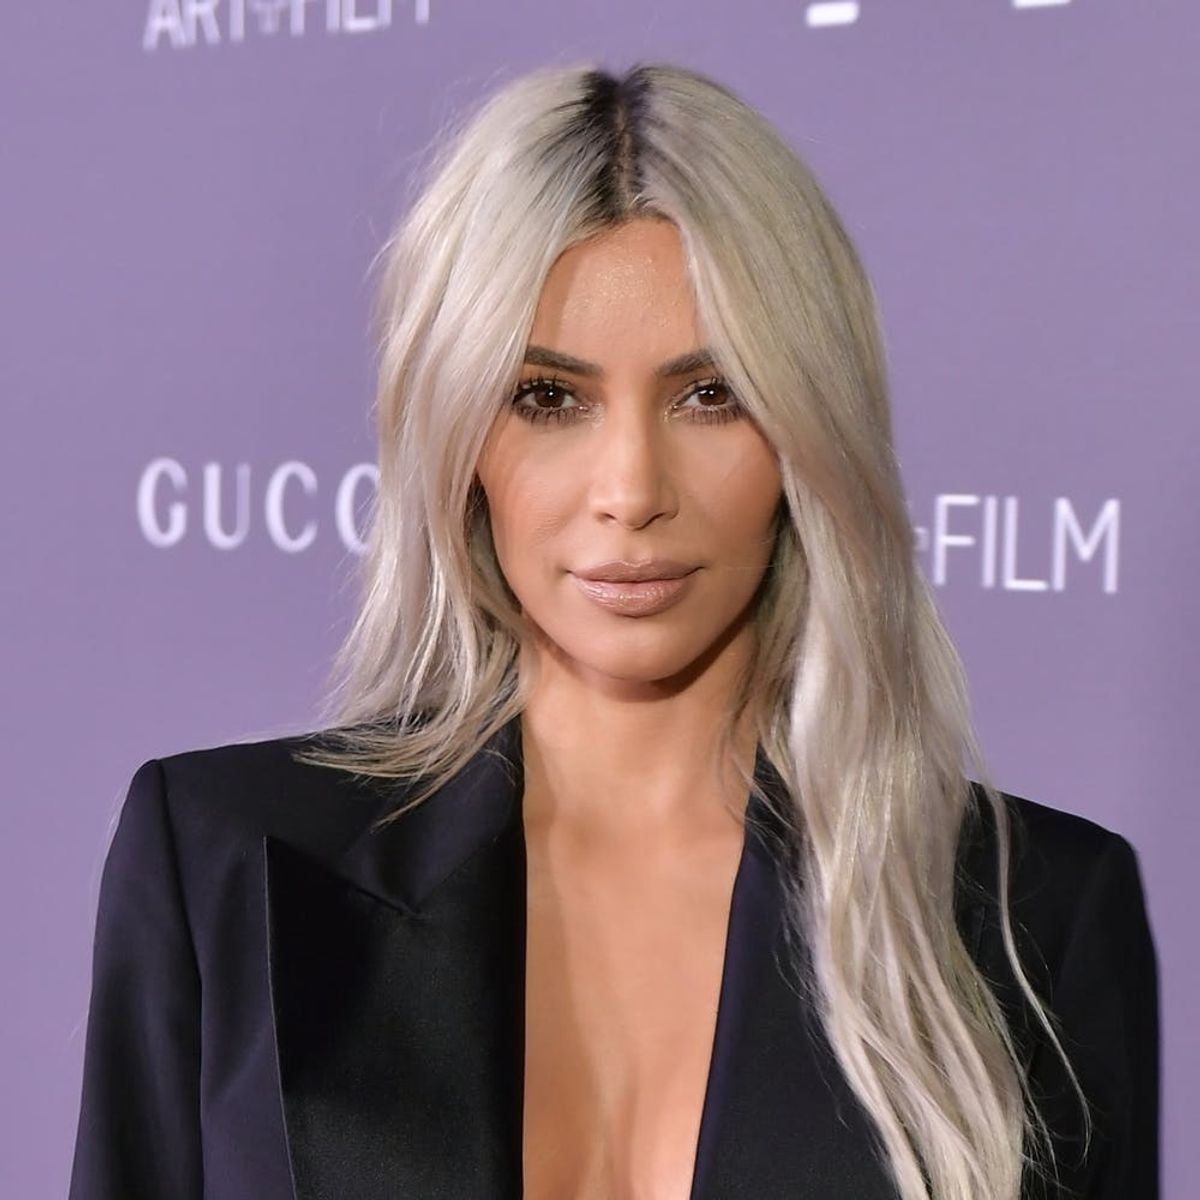 Kim Kardashian West Reveals the 3 Foods She Can’t Stand